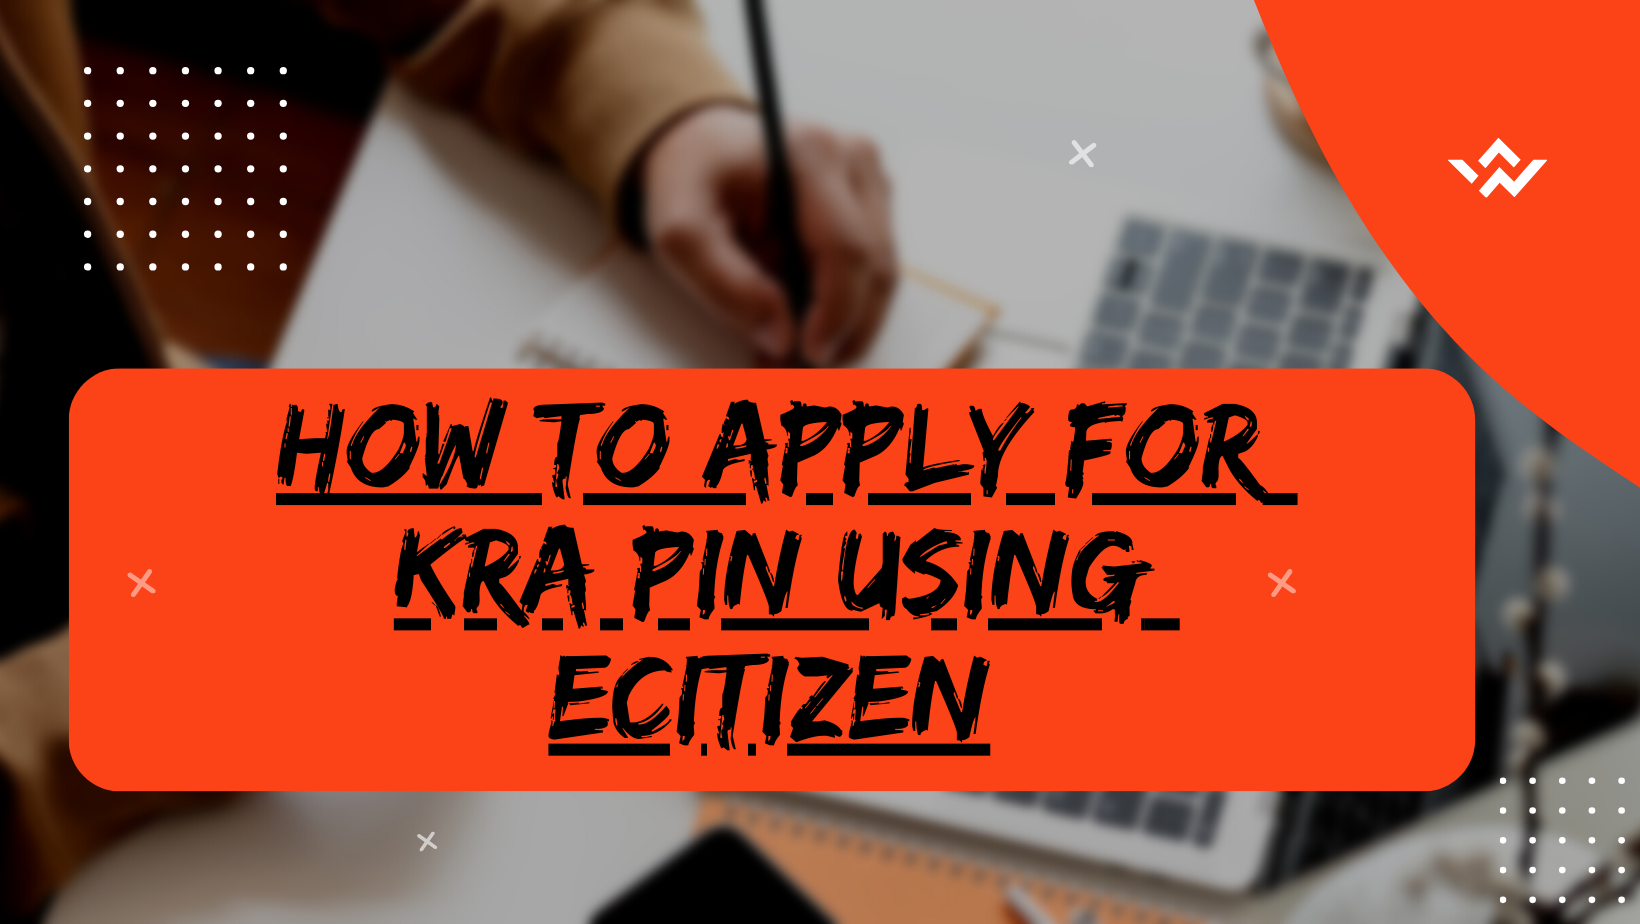 How To Apply For KRA PIN Using eCitizen